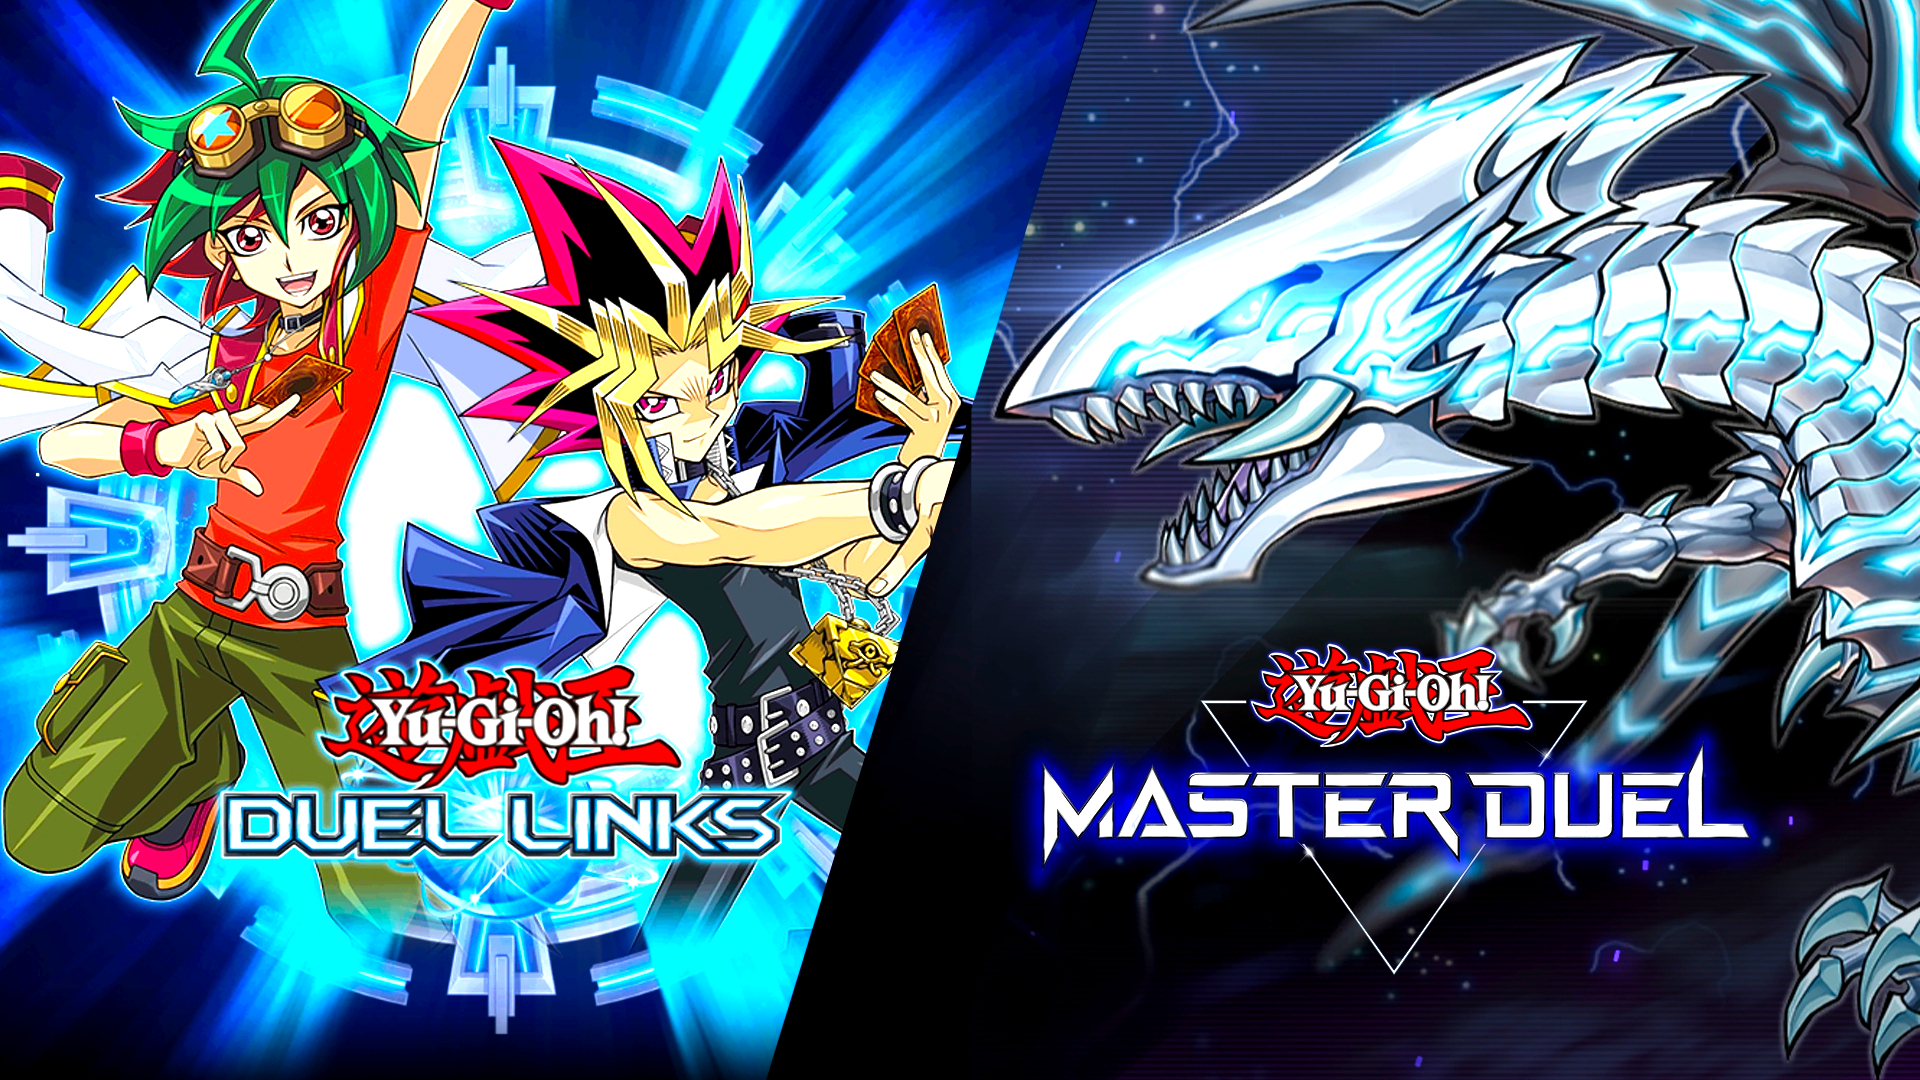 How to play Yugioh online – Master Duel or Duel Links? | Wargamer